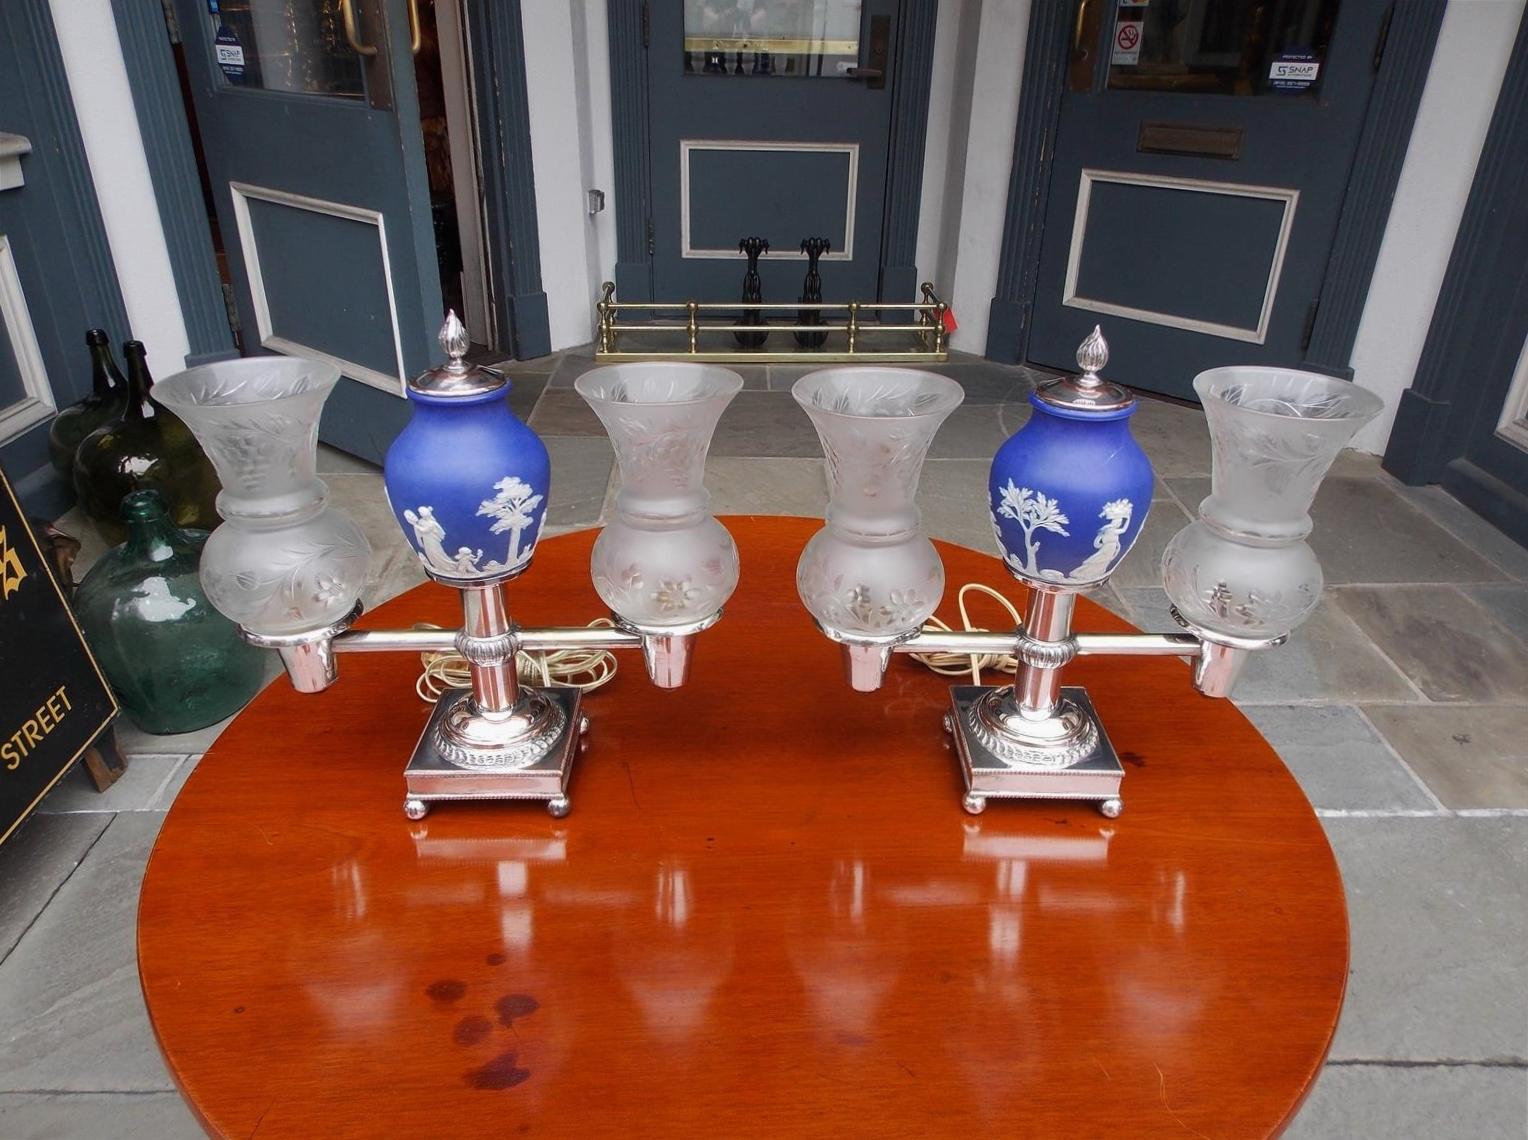 Pair of English Sheffield and Wedgewood figural solar lamps with the original frosted etched foliage and berry shades. Early 19th century. Pair of lamps have been electrified.